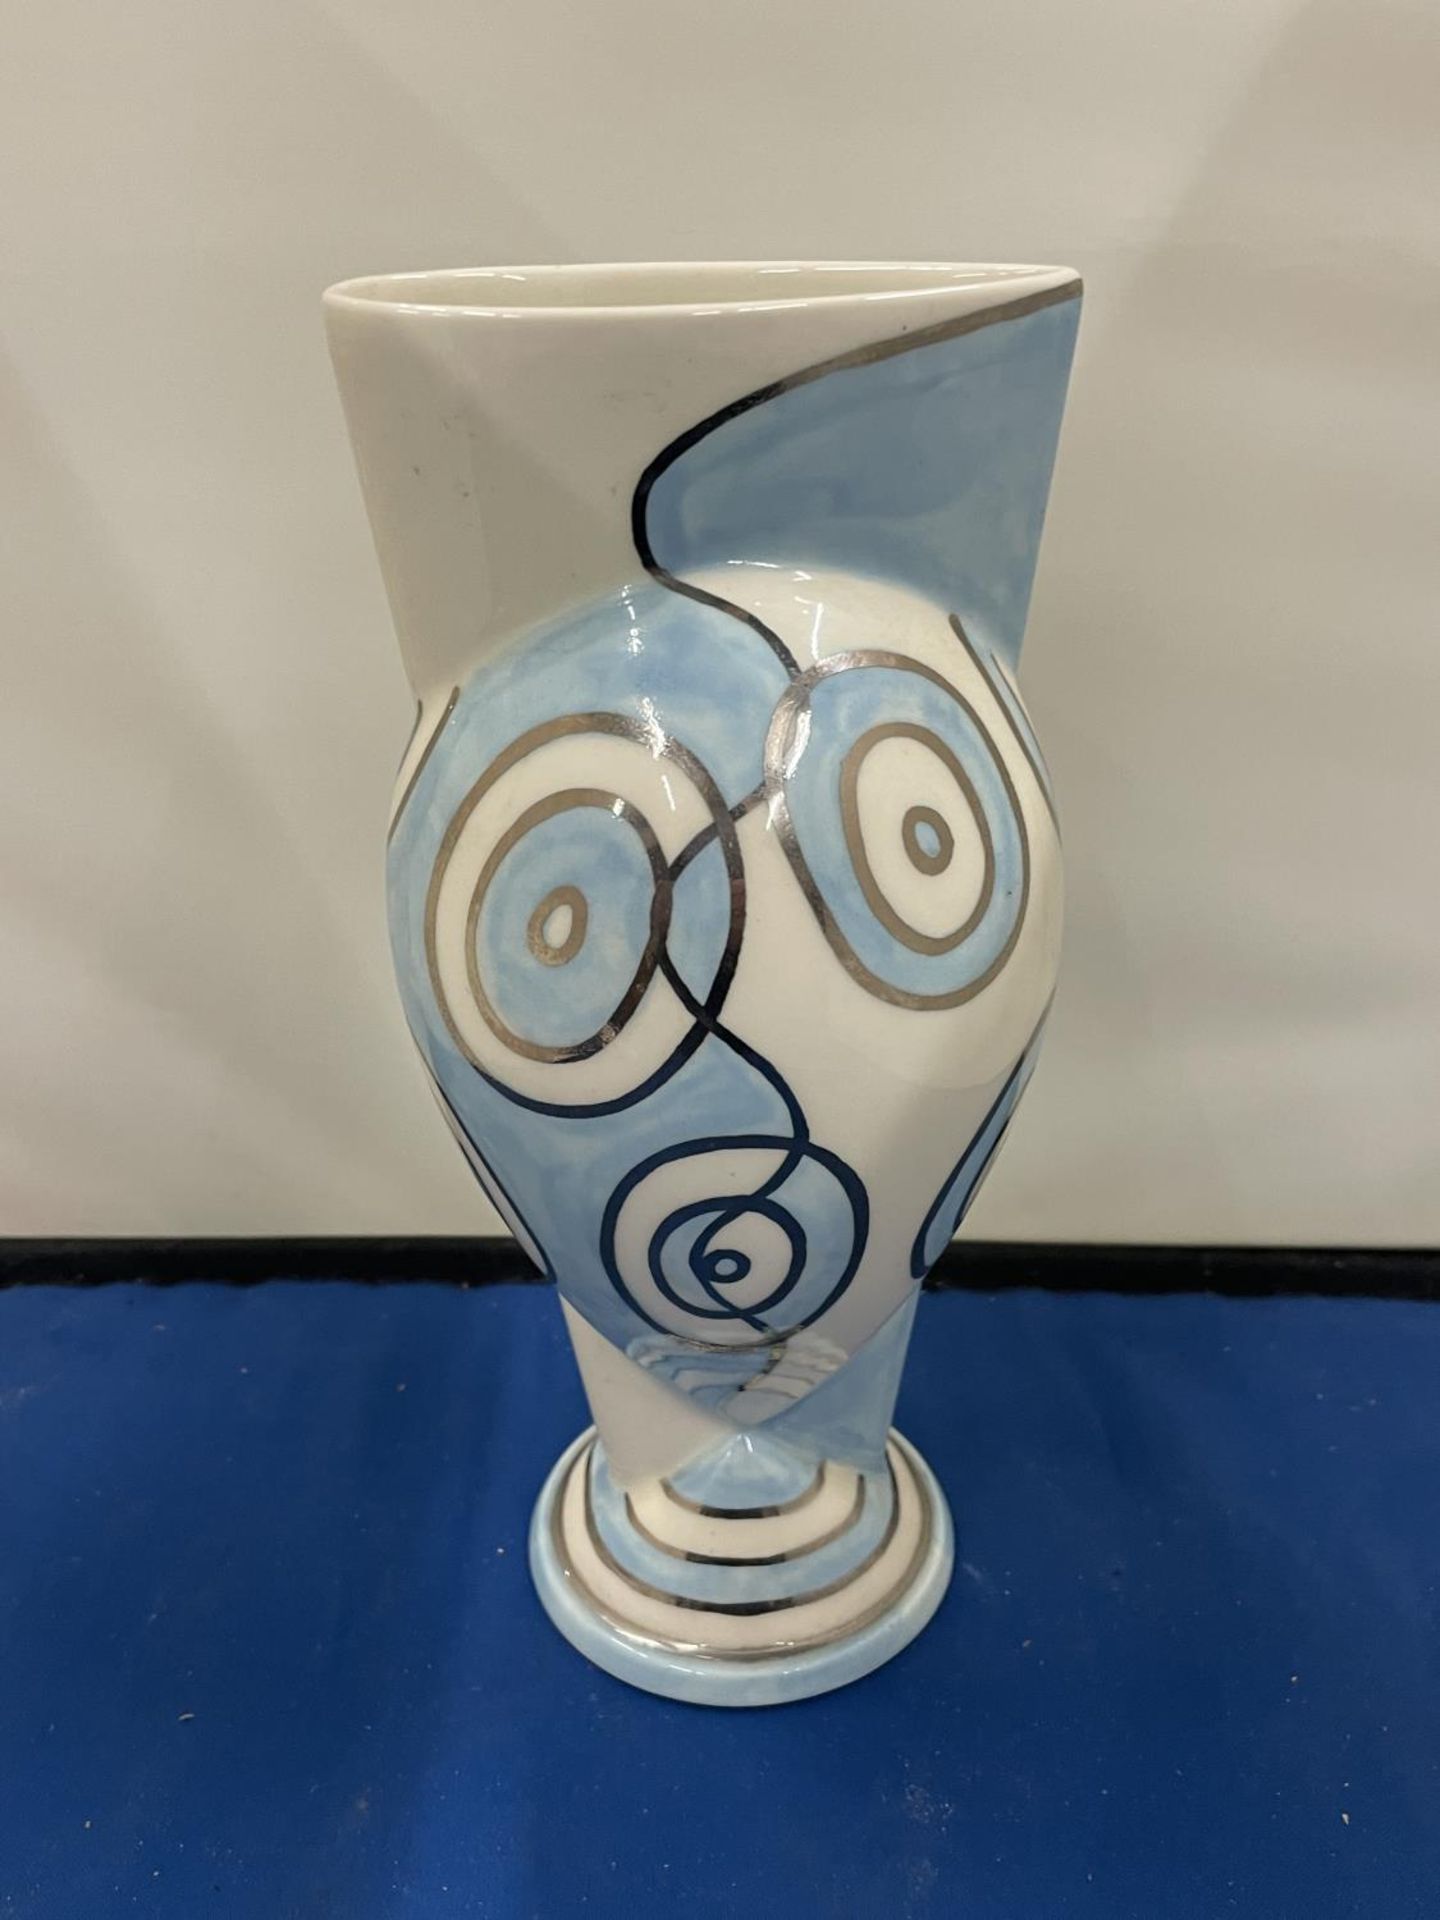 A LIMITED EDITION 8/250 SMIC VASE BY COLIN DOWNES IN THE STYLE OF CLARICE CLIFF